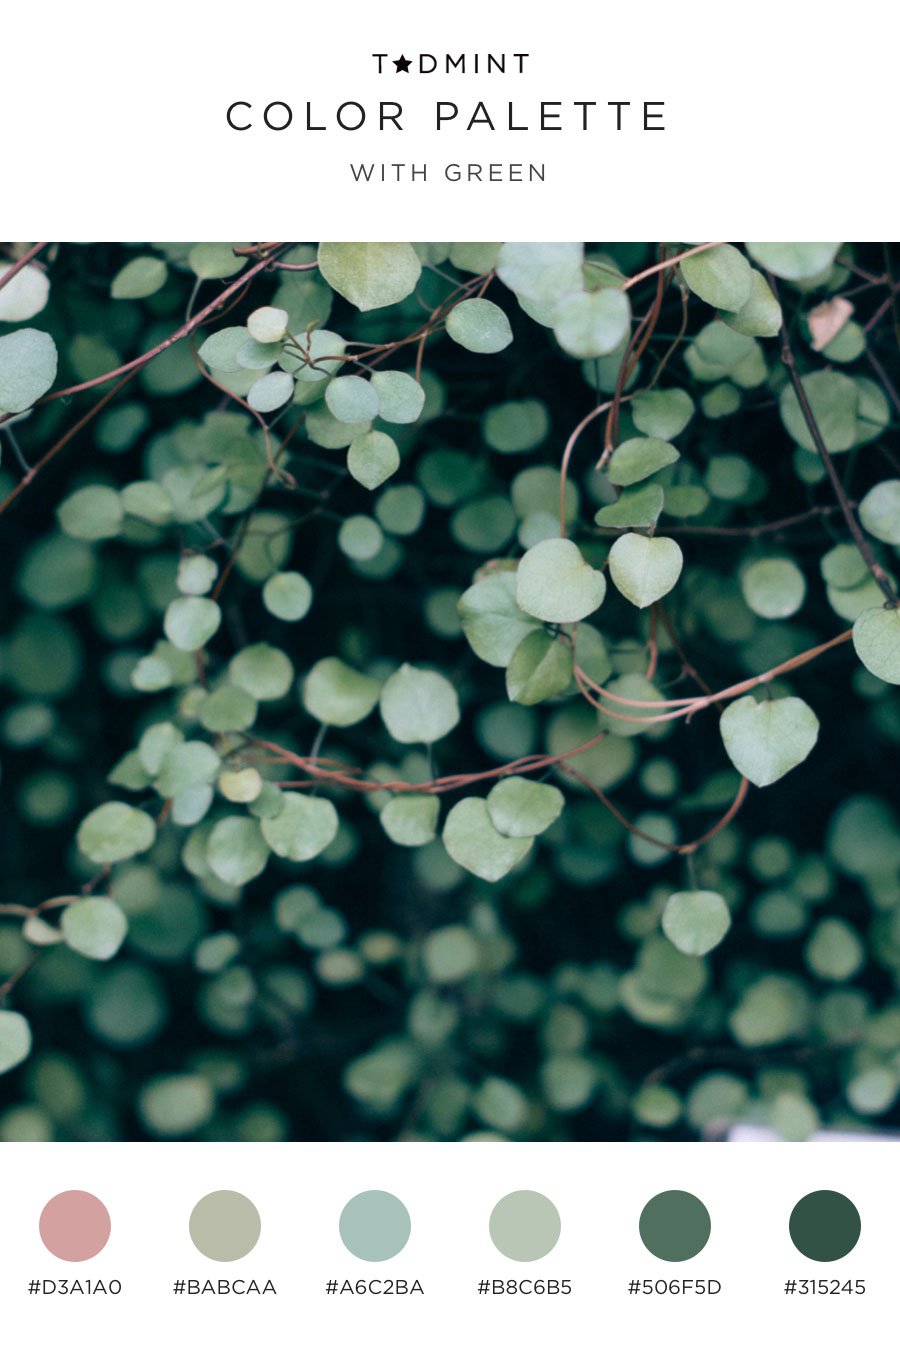 color palettes with green inspired by small leaves